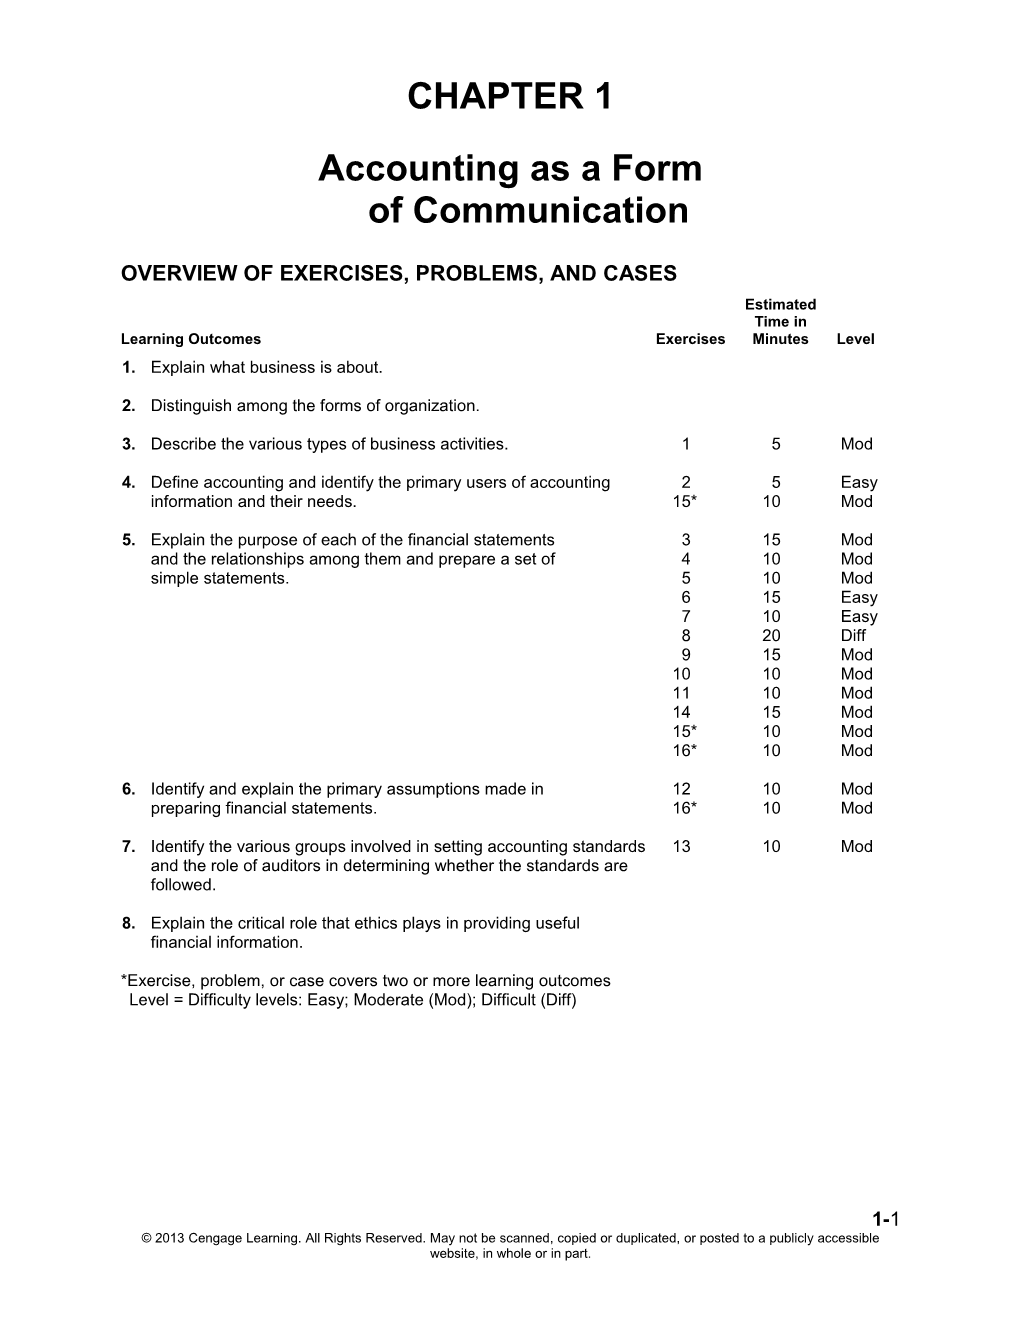 Chapter 1: Accounting As a Form of Communication